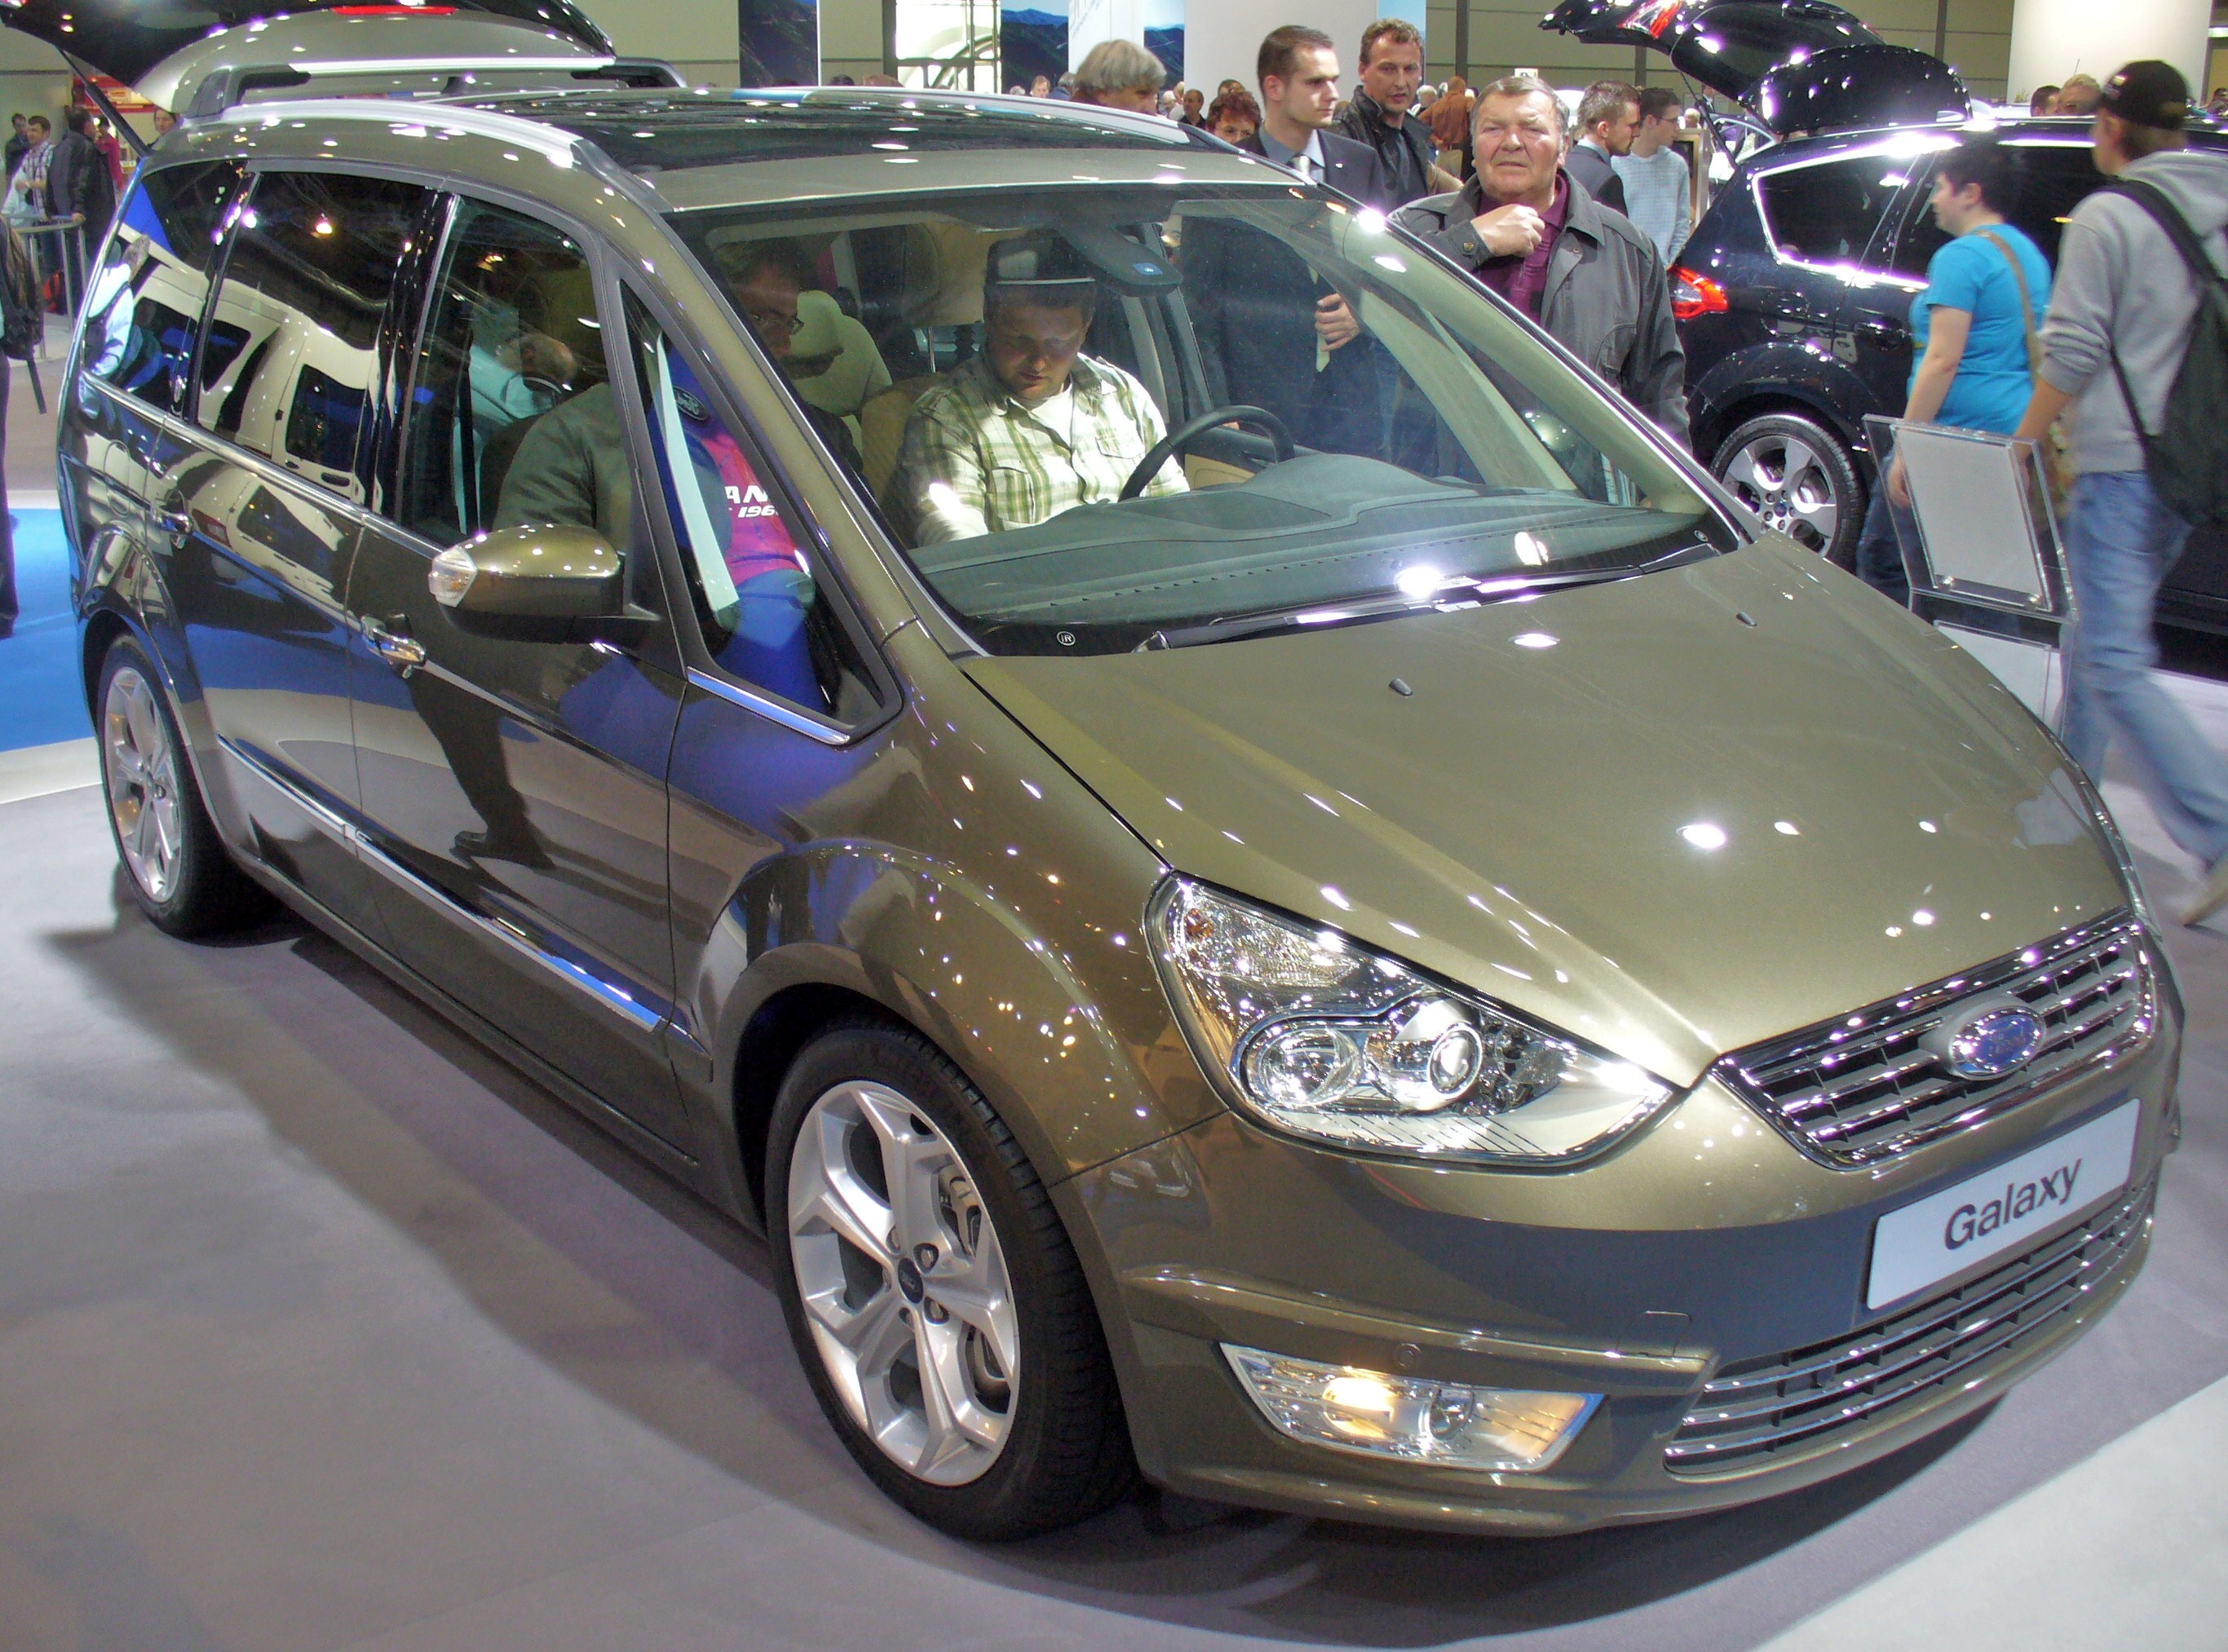 File:Ford Galaxy Facelift.JPG - Wikipedia